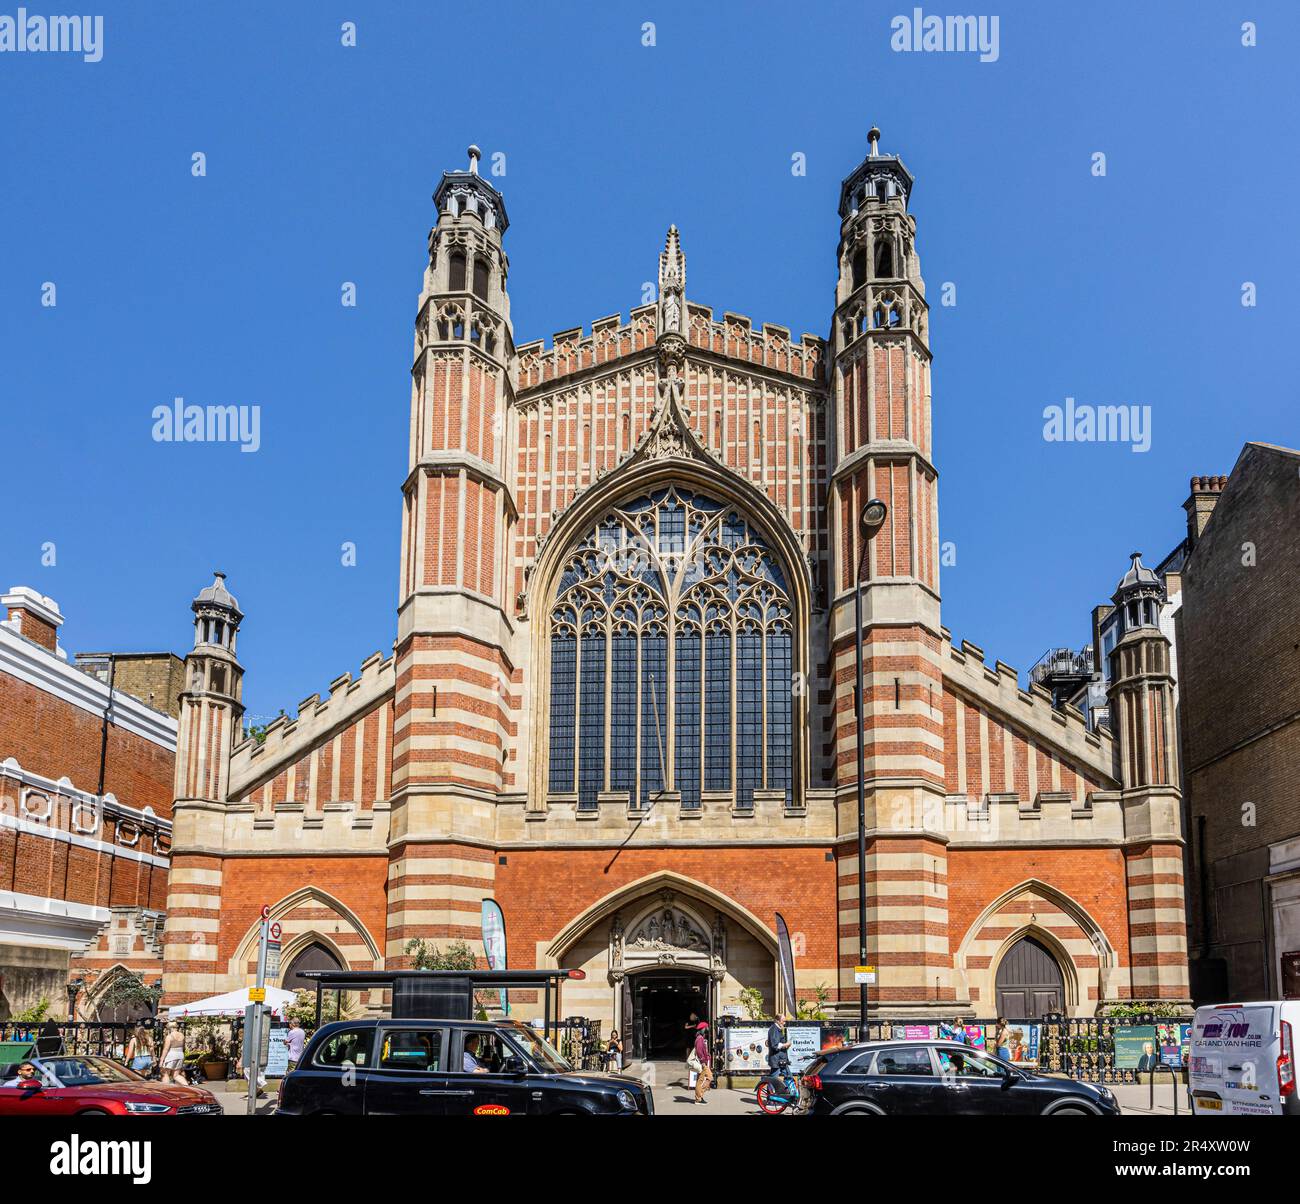 The front elevation of the iconic Gothic Revival architecture Holy Trinity Sloane Square church in Upper Chelsea, London SW1 on a sunny day, blue sky Stock Photo